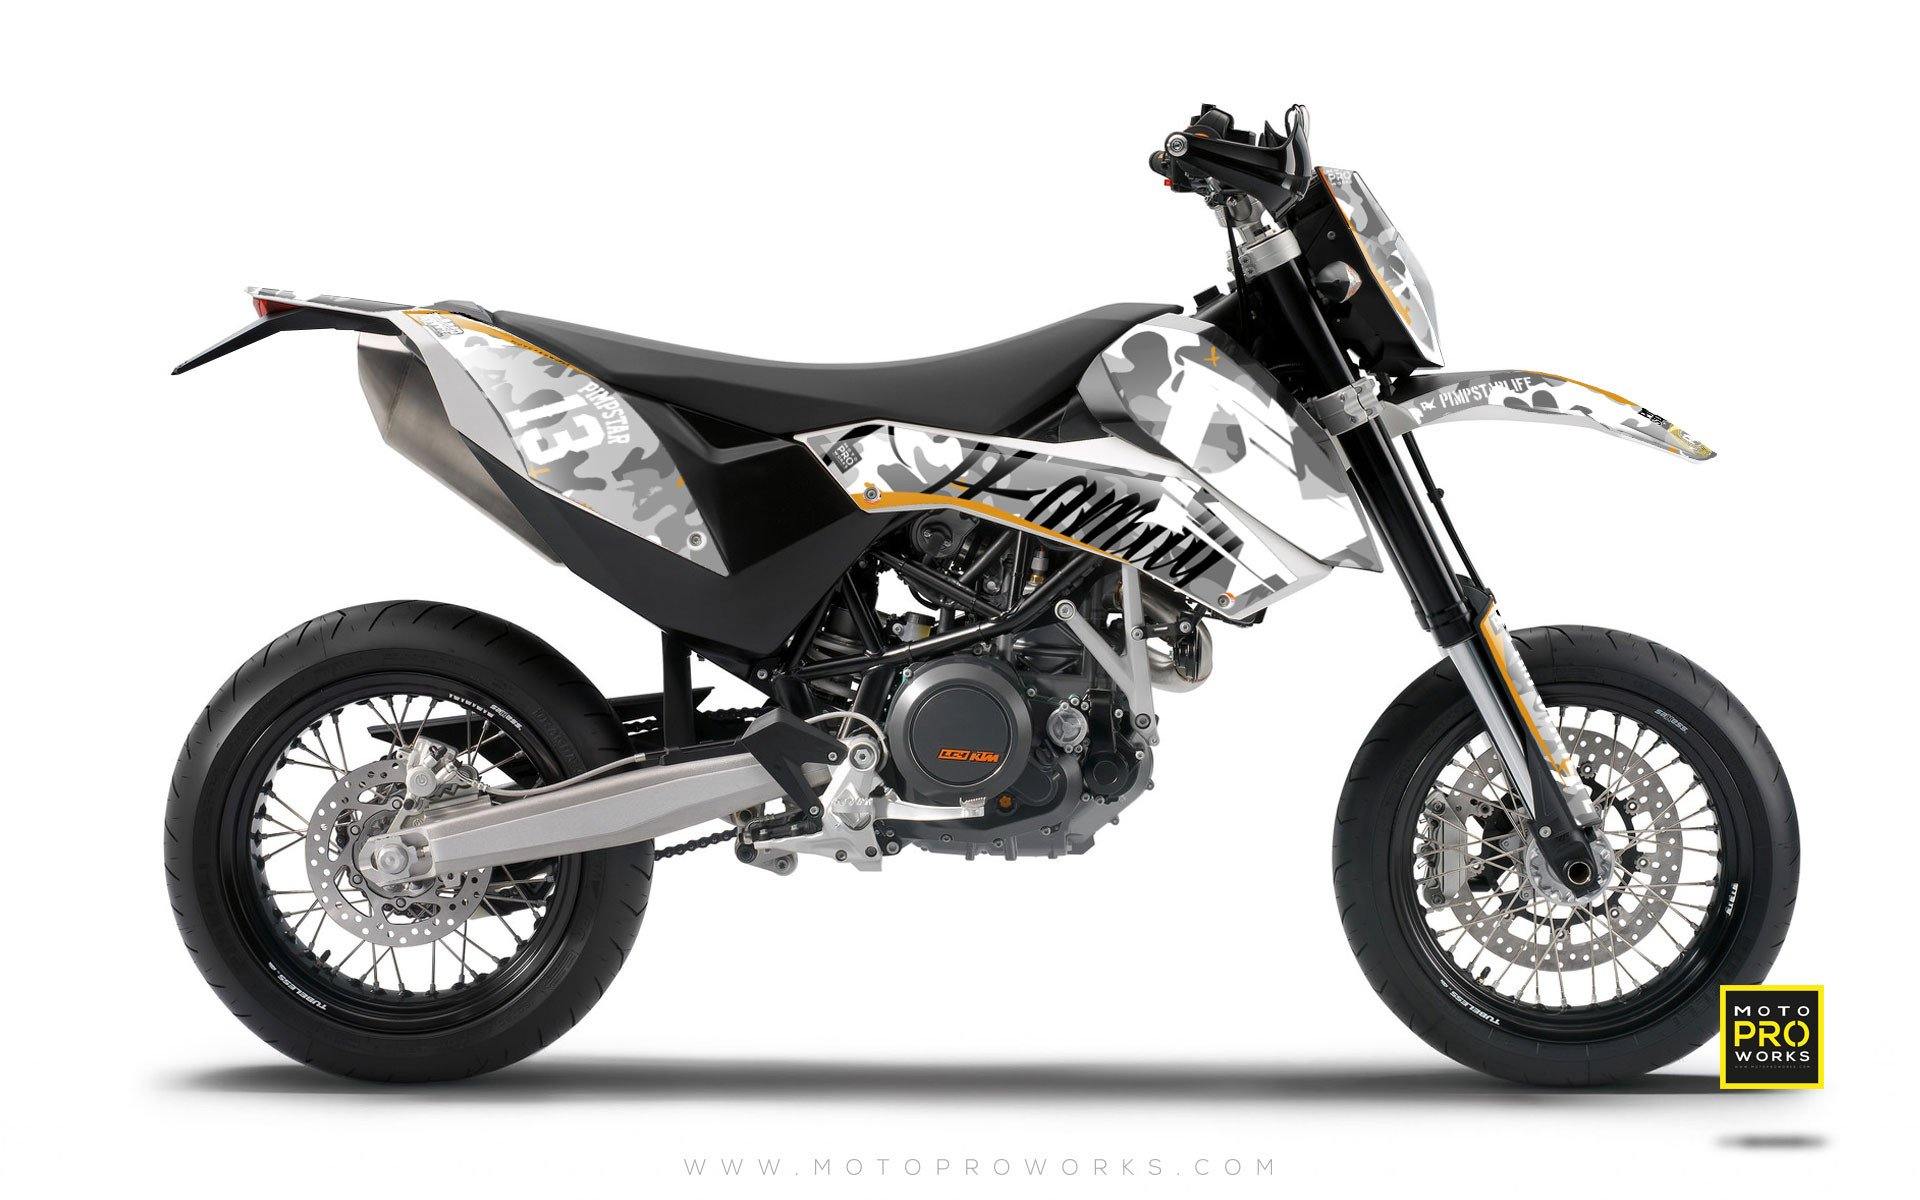 KTM GRAPHIC KIT - "WILDCAMO" (snow) - MotoProWorks | Decals and Bike Graphic kit